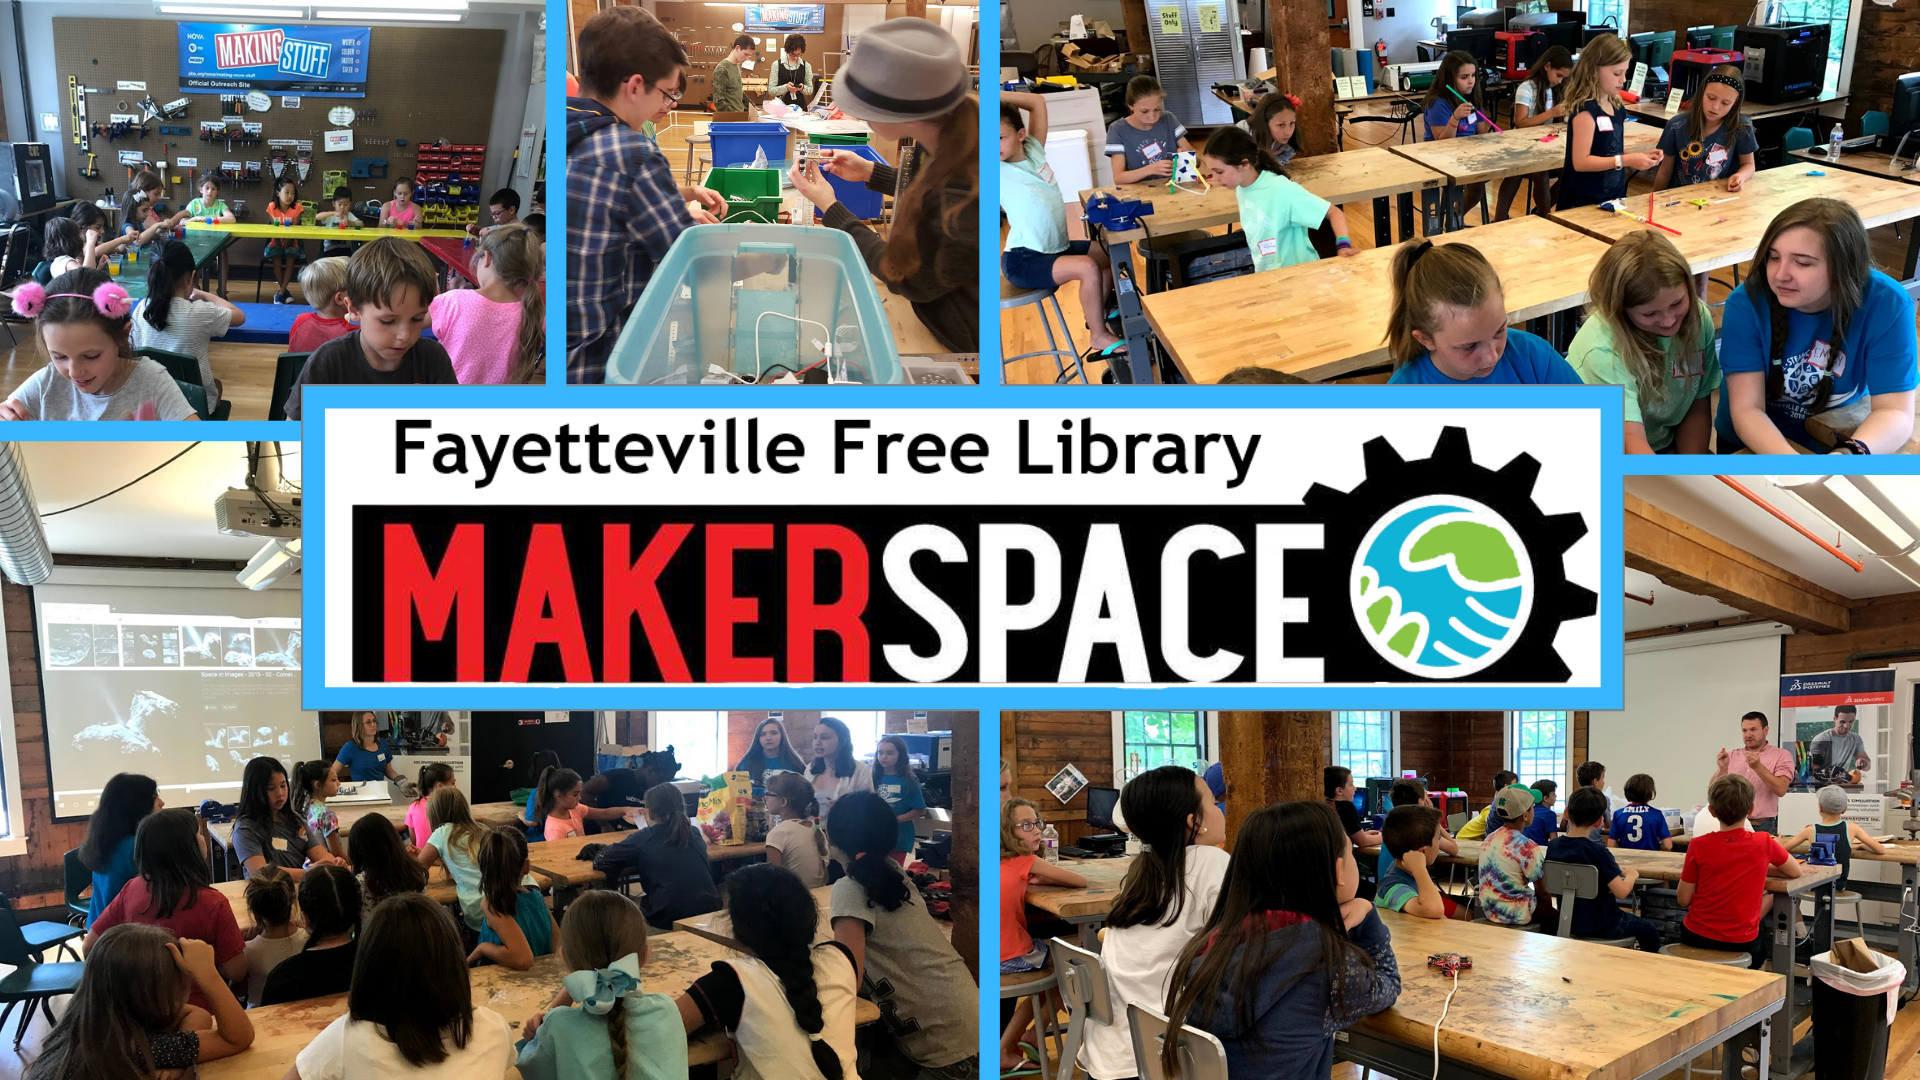 Fayetteville Free Library Makerspace